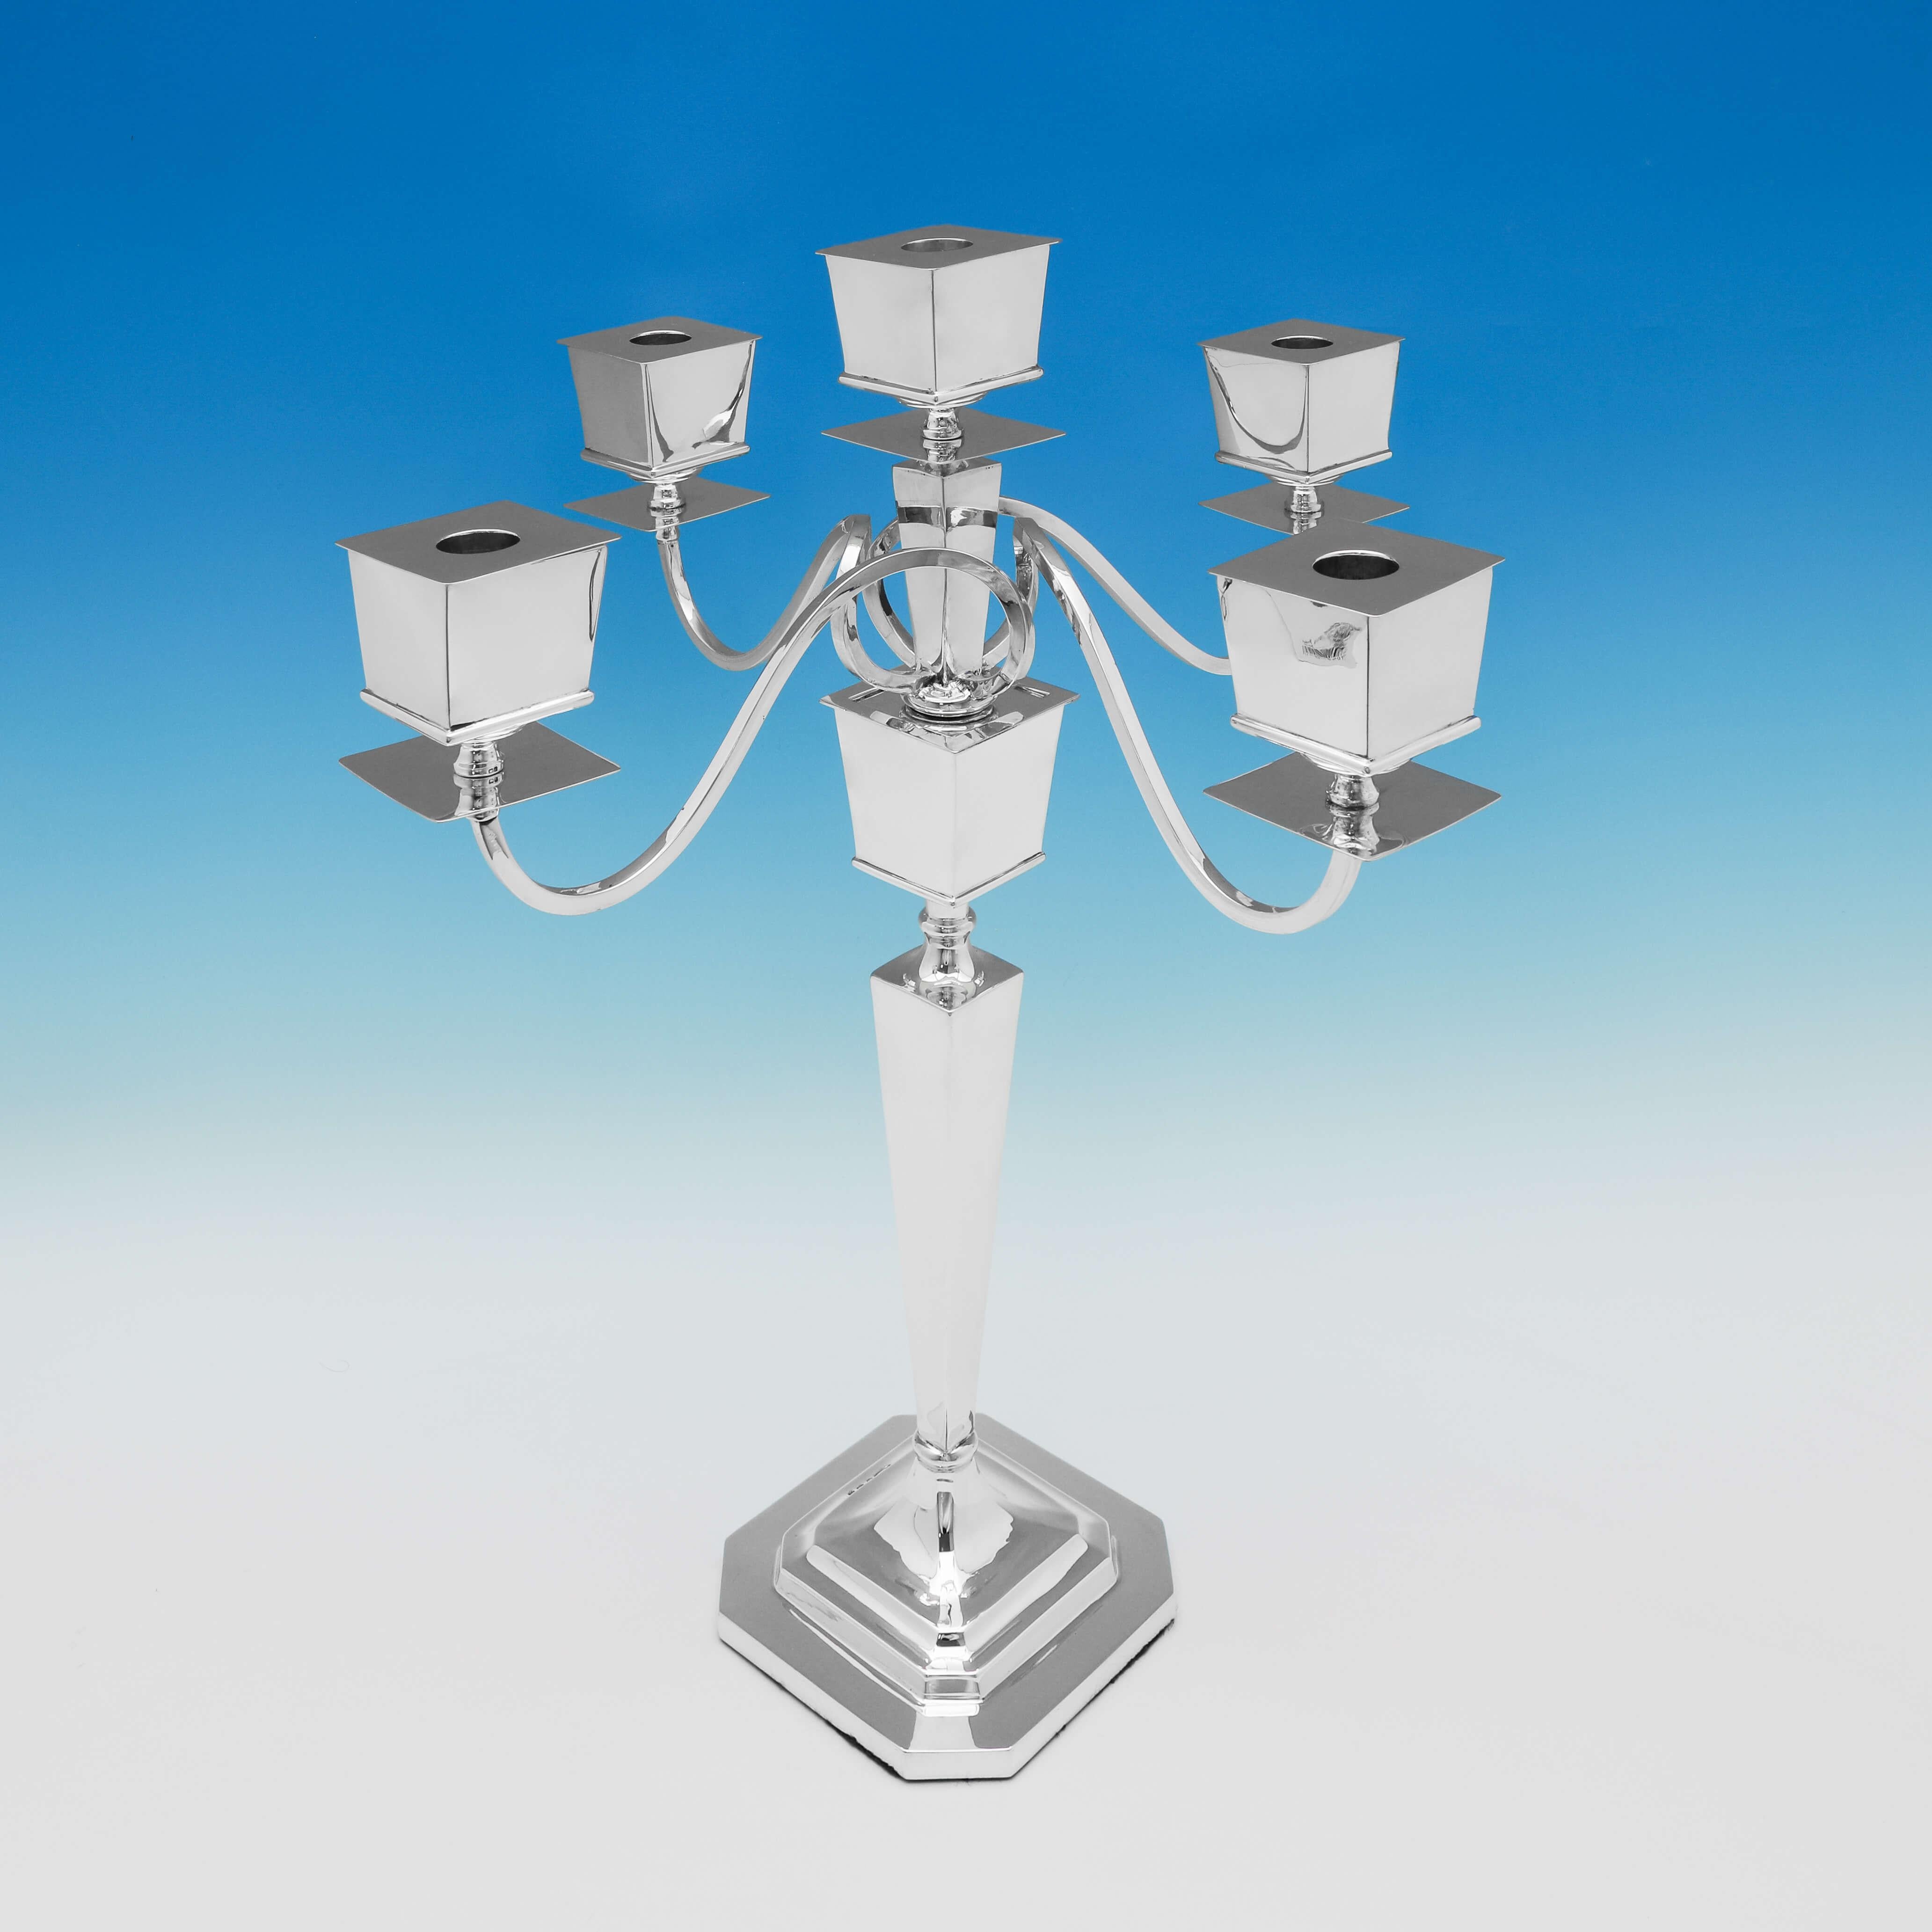 Hallmarked in Birmingham in 1926 by Britton, Gould & Co., this very stylish, sterling silver candelabrum, is in the Art Deco taste, with space for 5 candles. The candelabrum measures 19.5